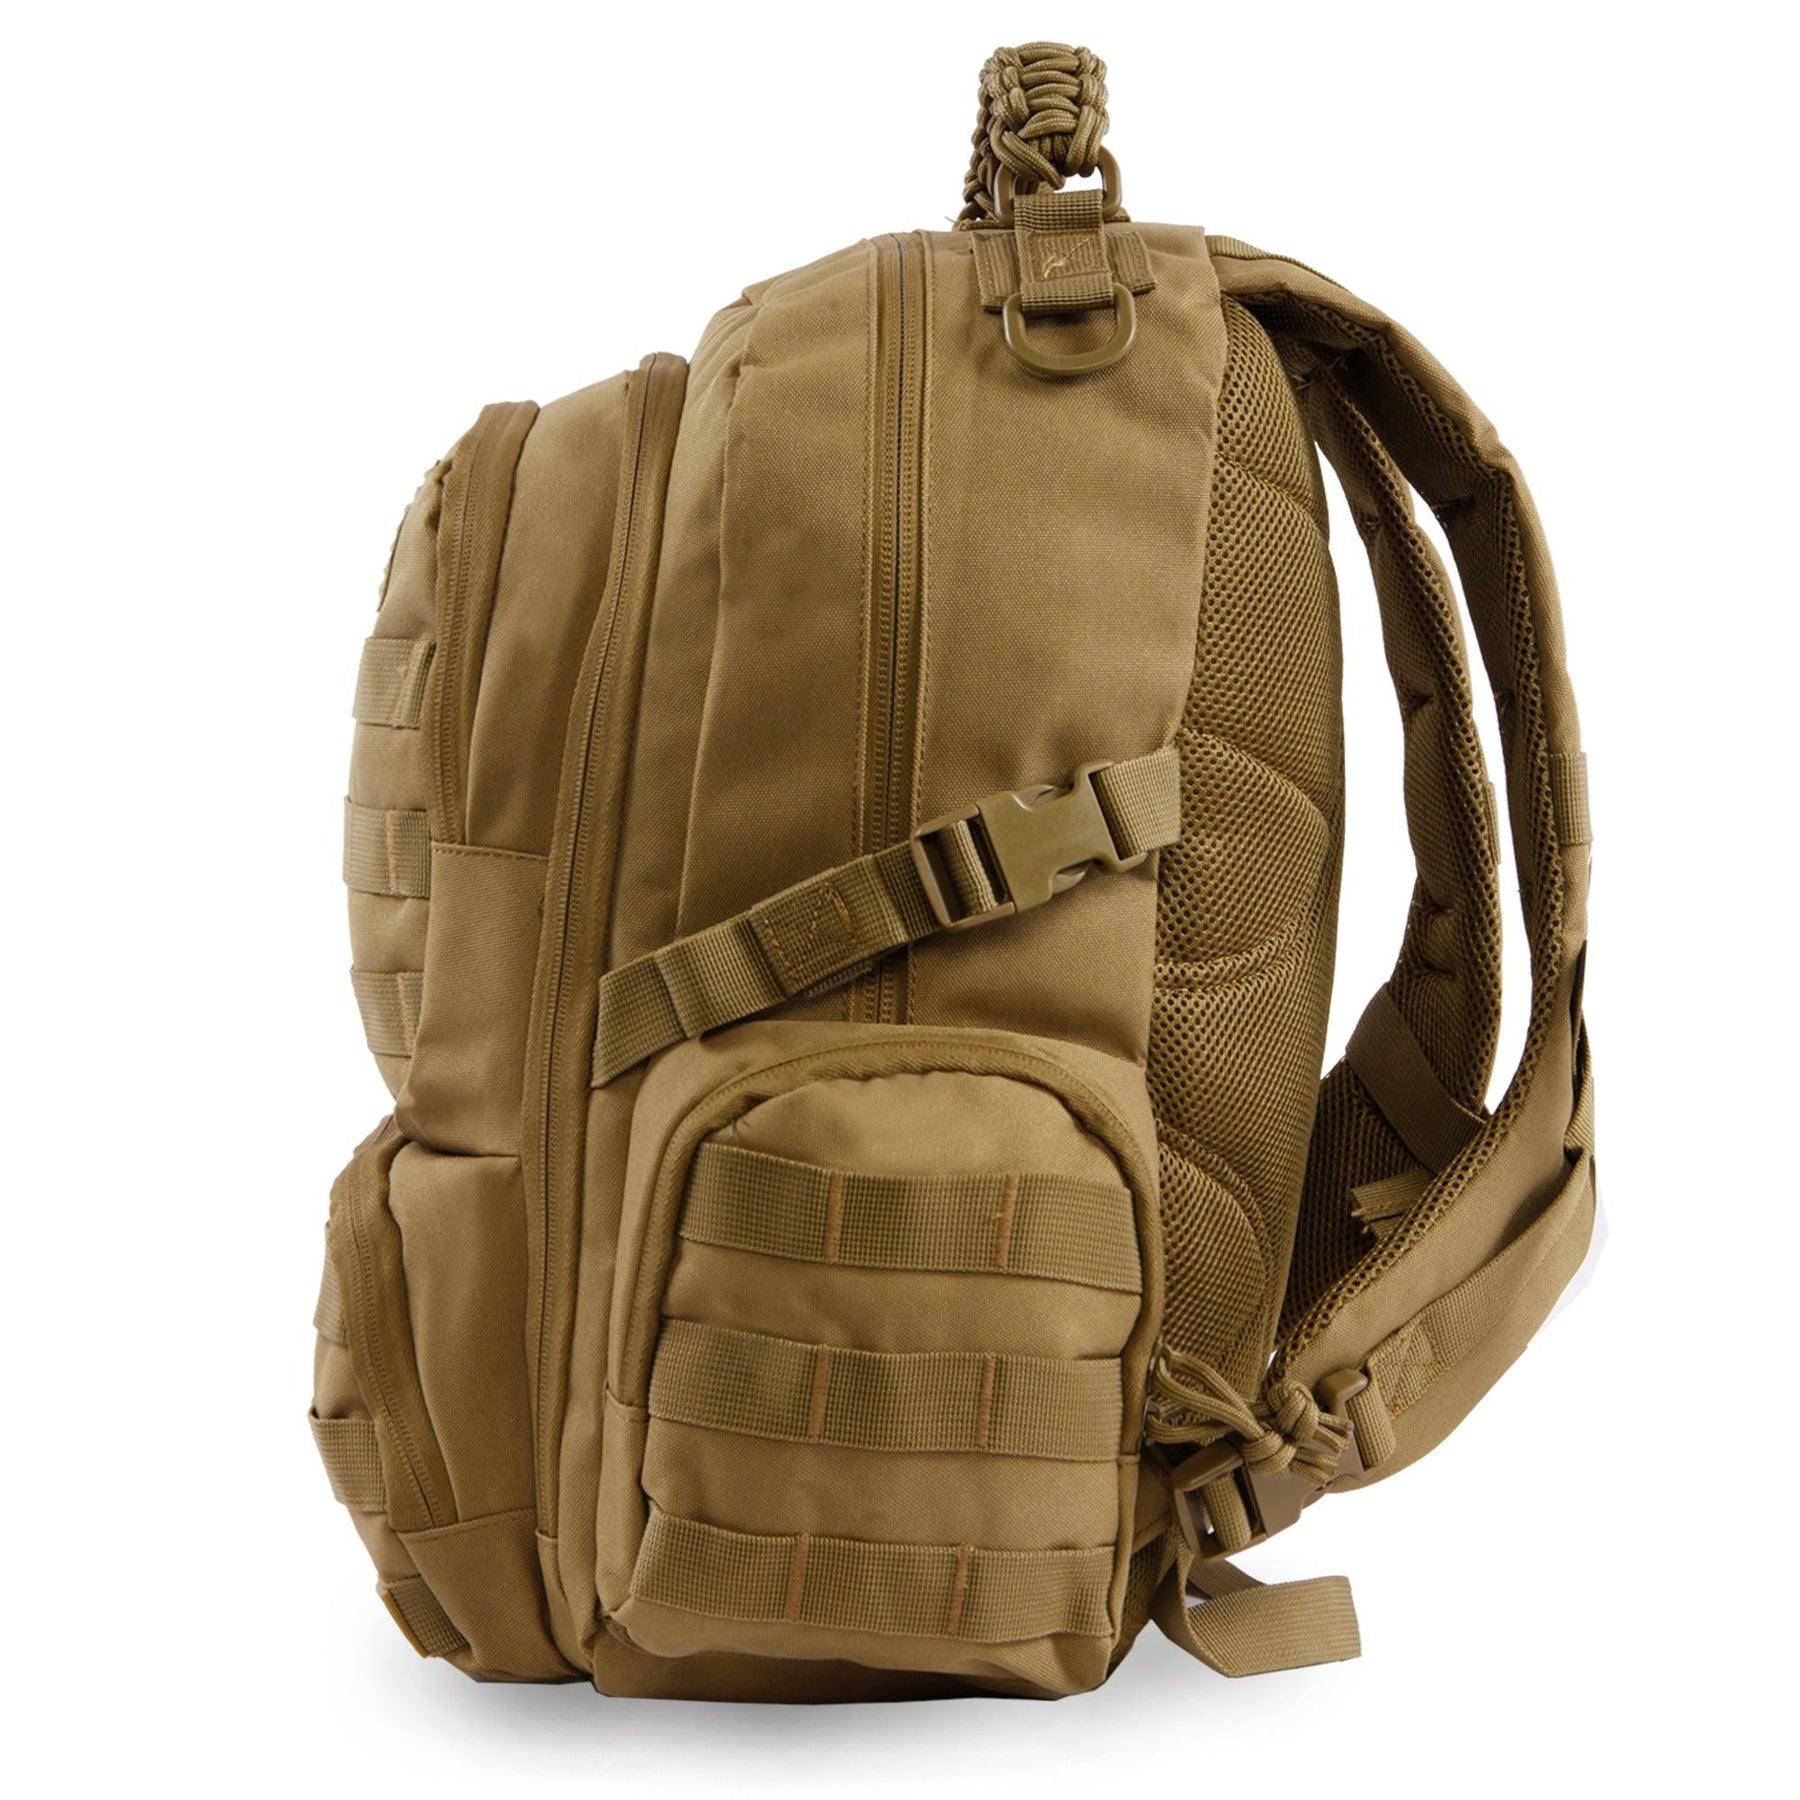 West Tactical Backpack, Hiking, Military